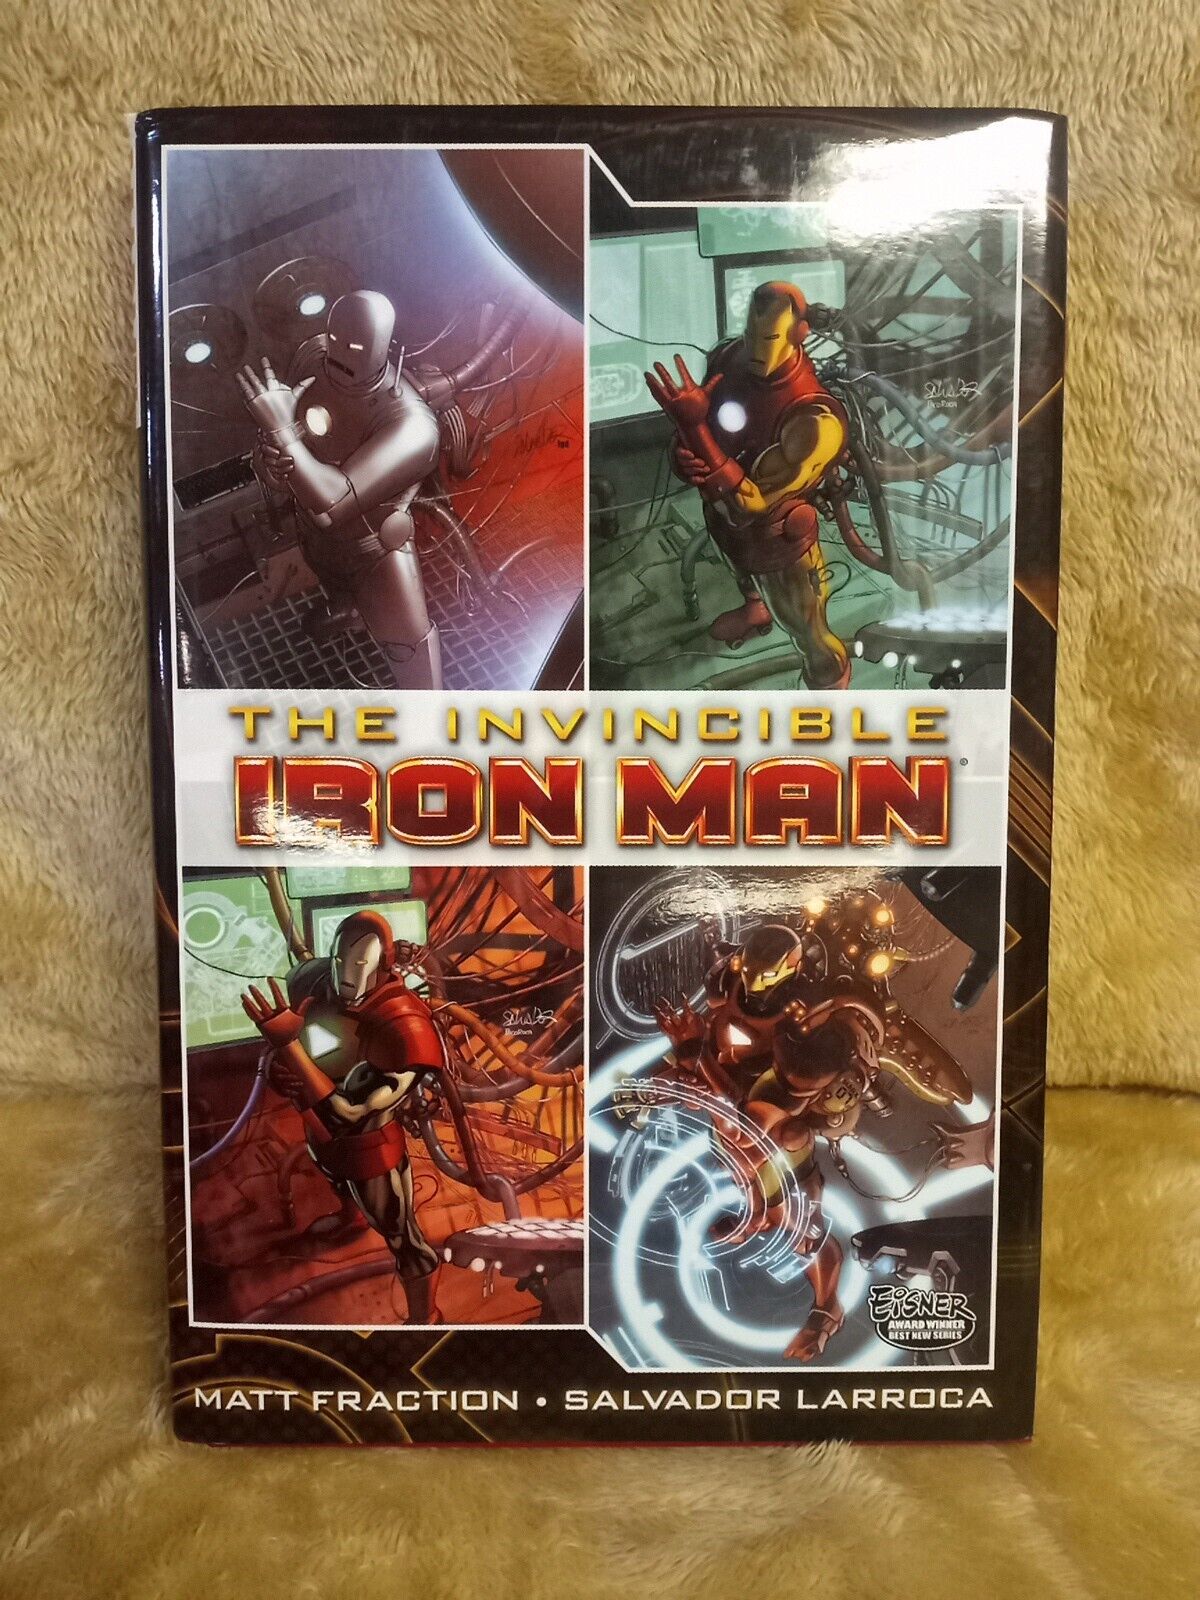 Invincible Iron Man Vol 1 (FIRST PRINT March 2010) Hardcover HC Fraction Larroca